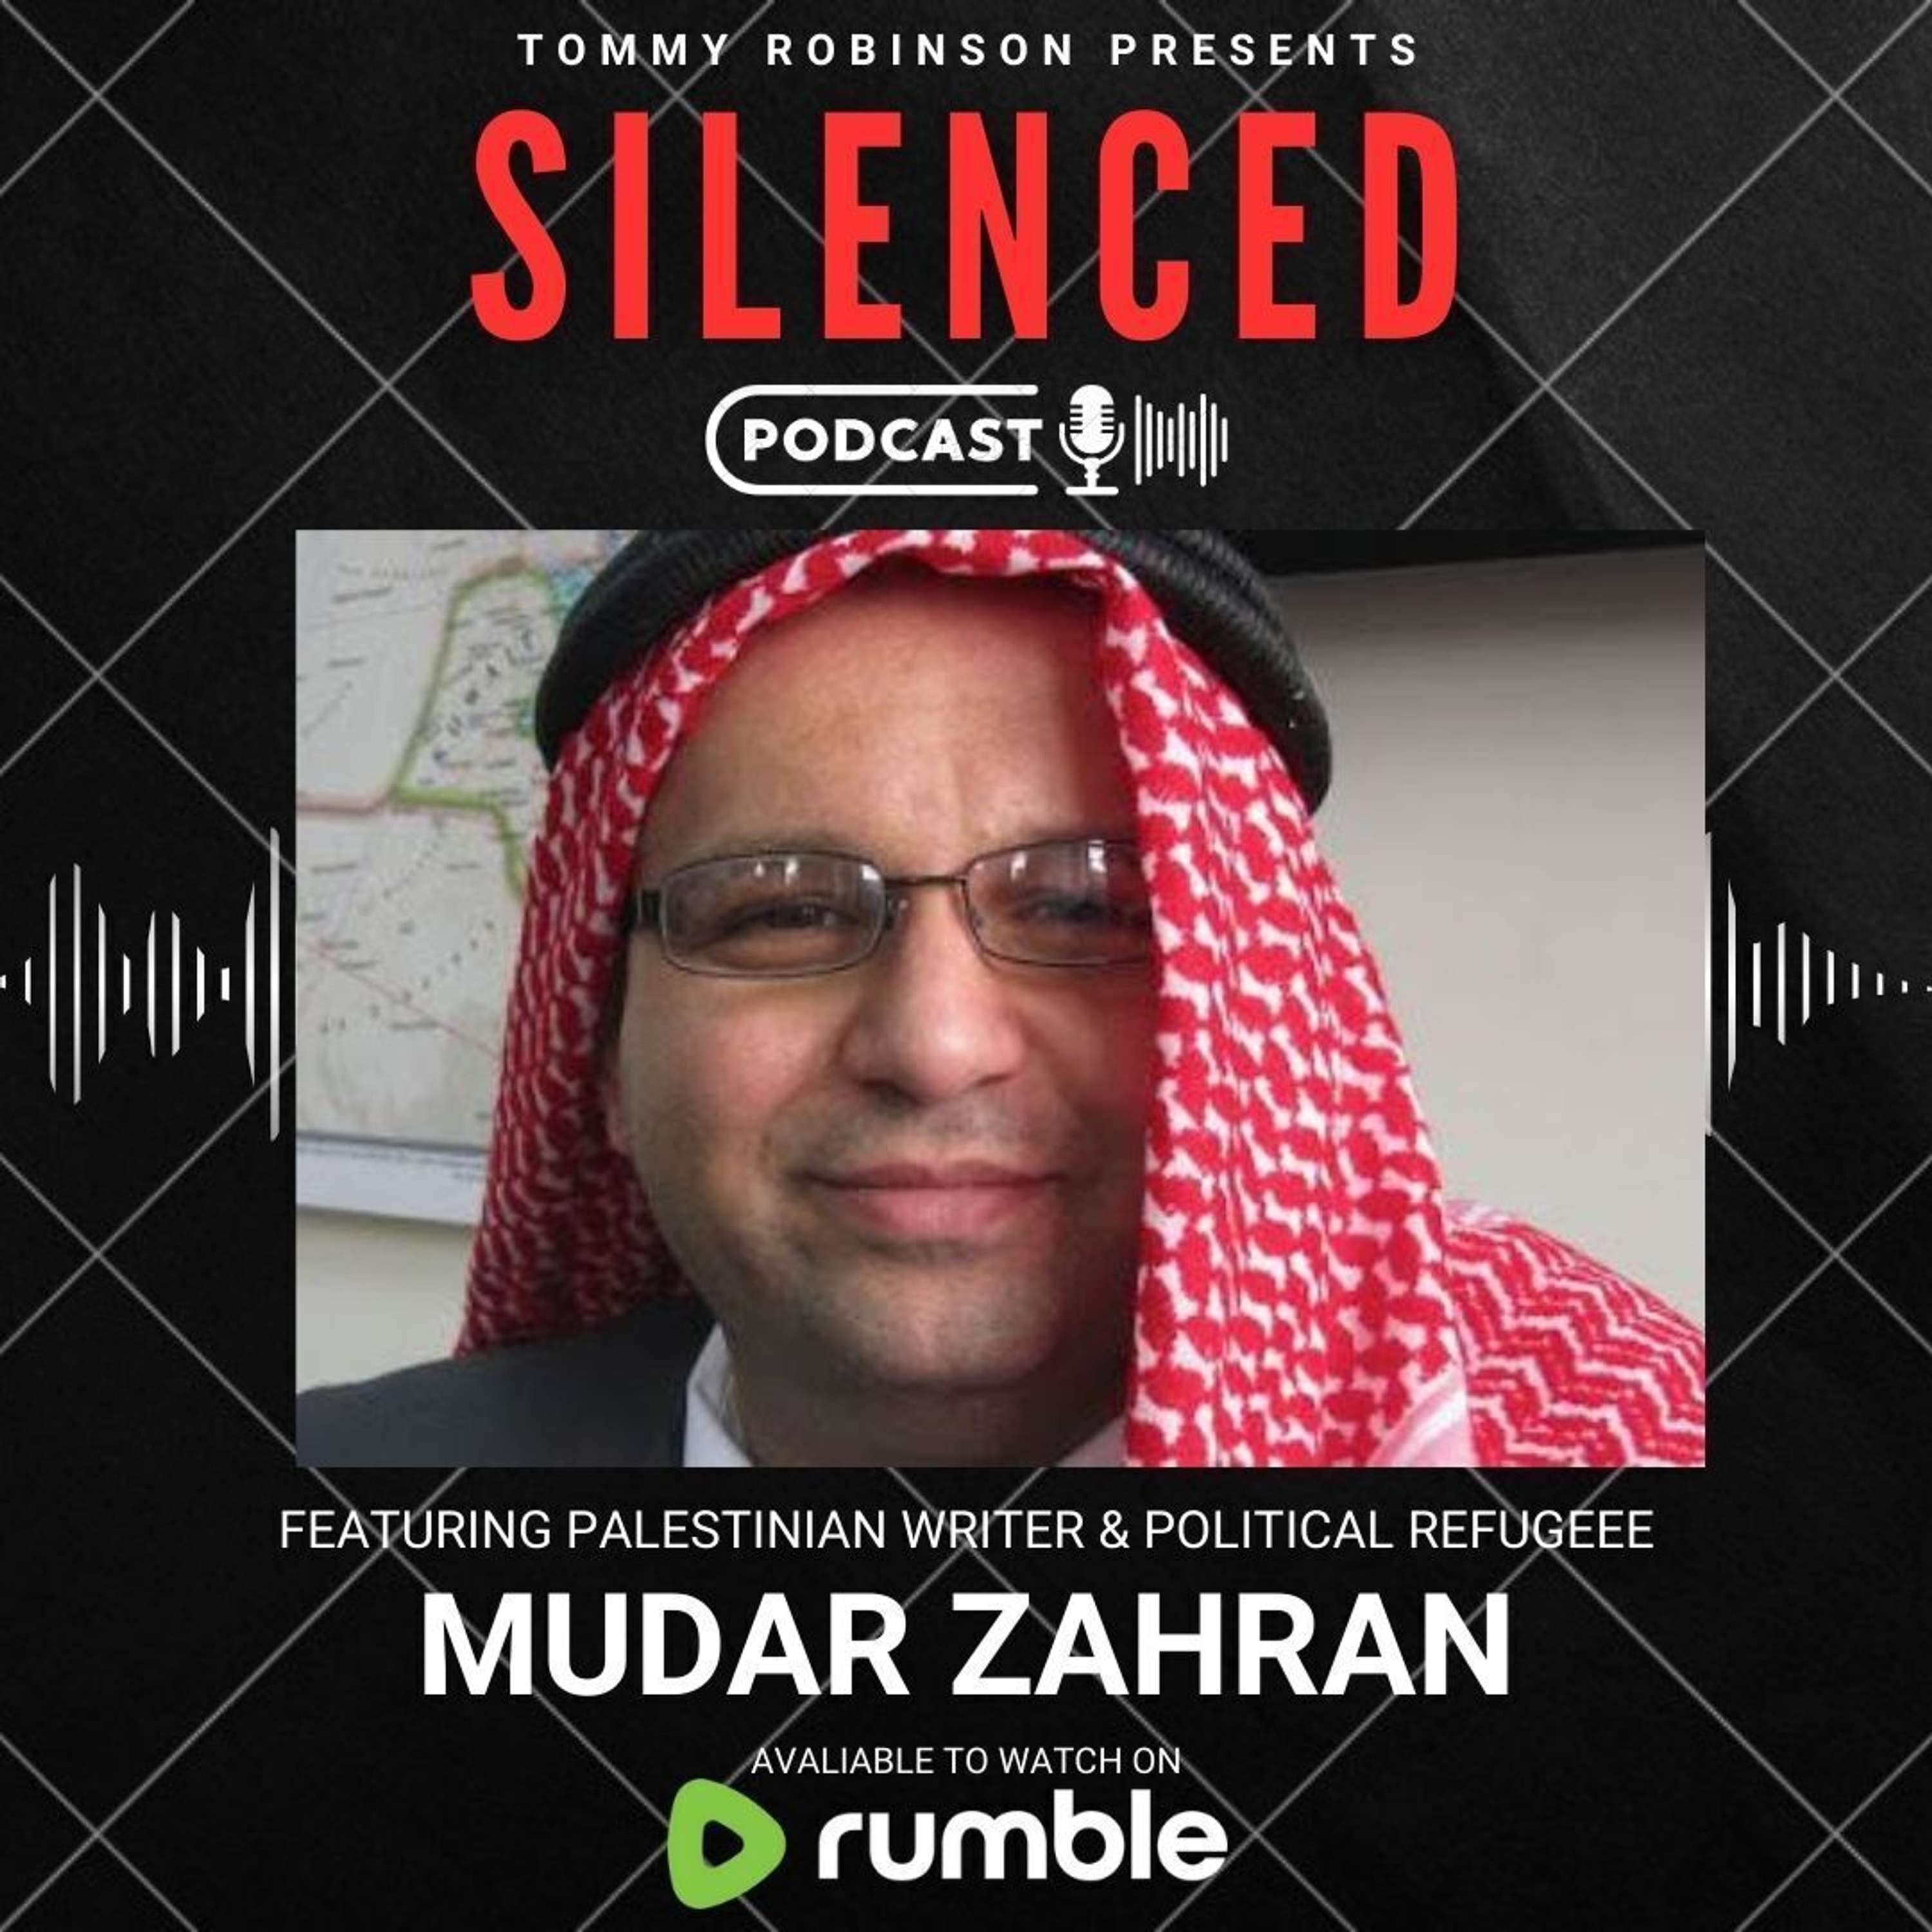 Episode 21 - SILENCED with Tommy Robinson - Featuring Mudar Zahran